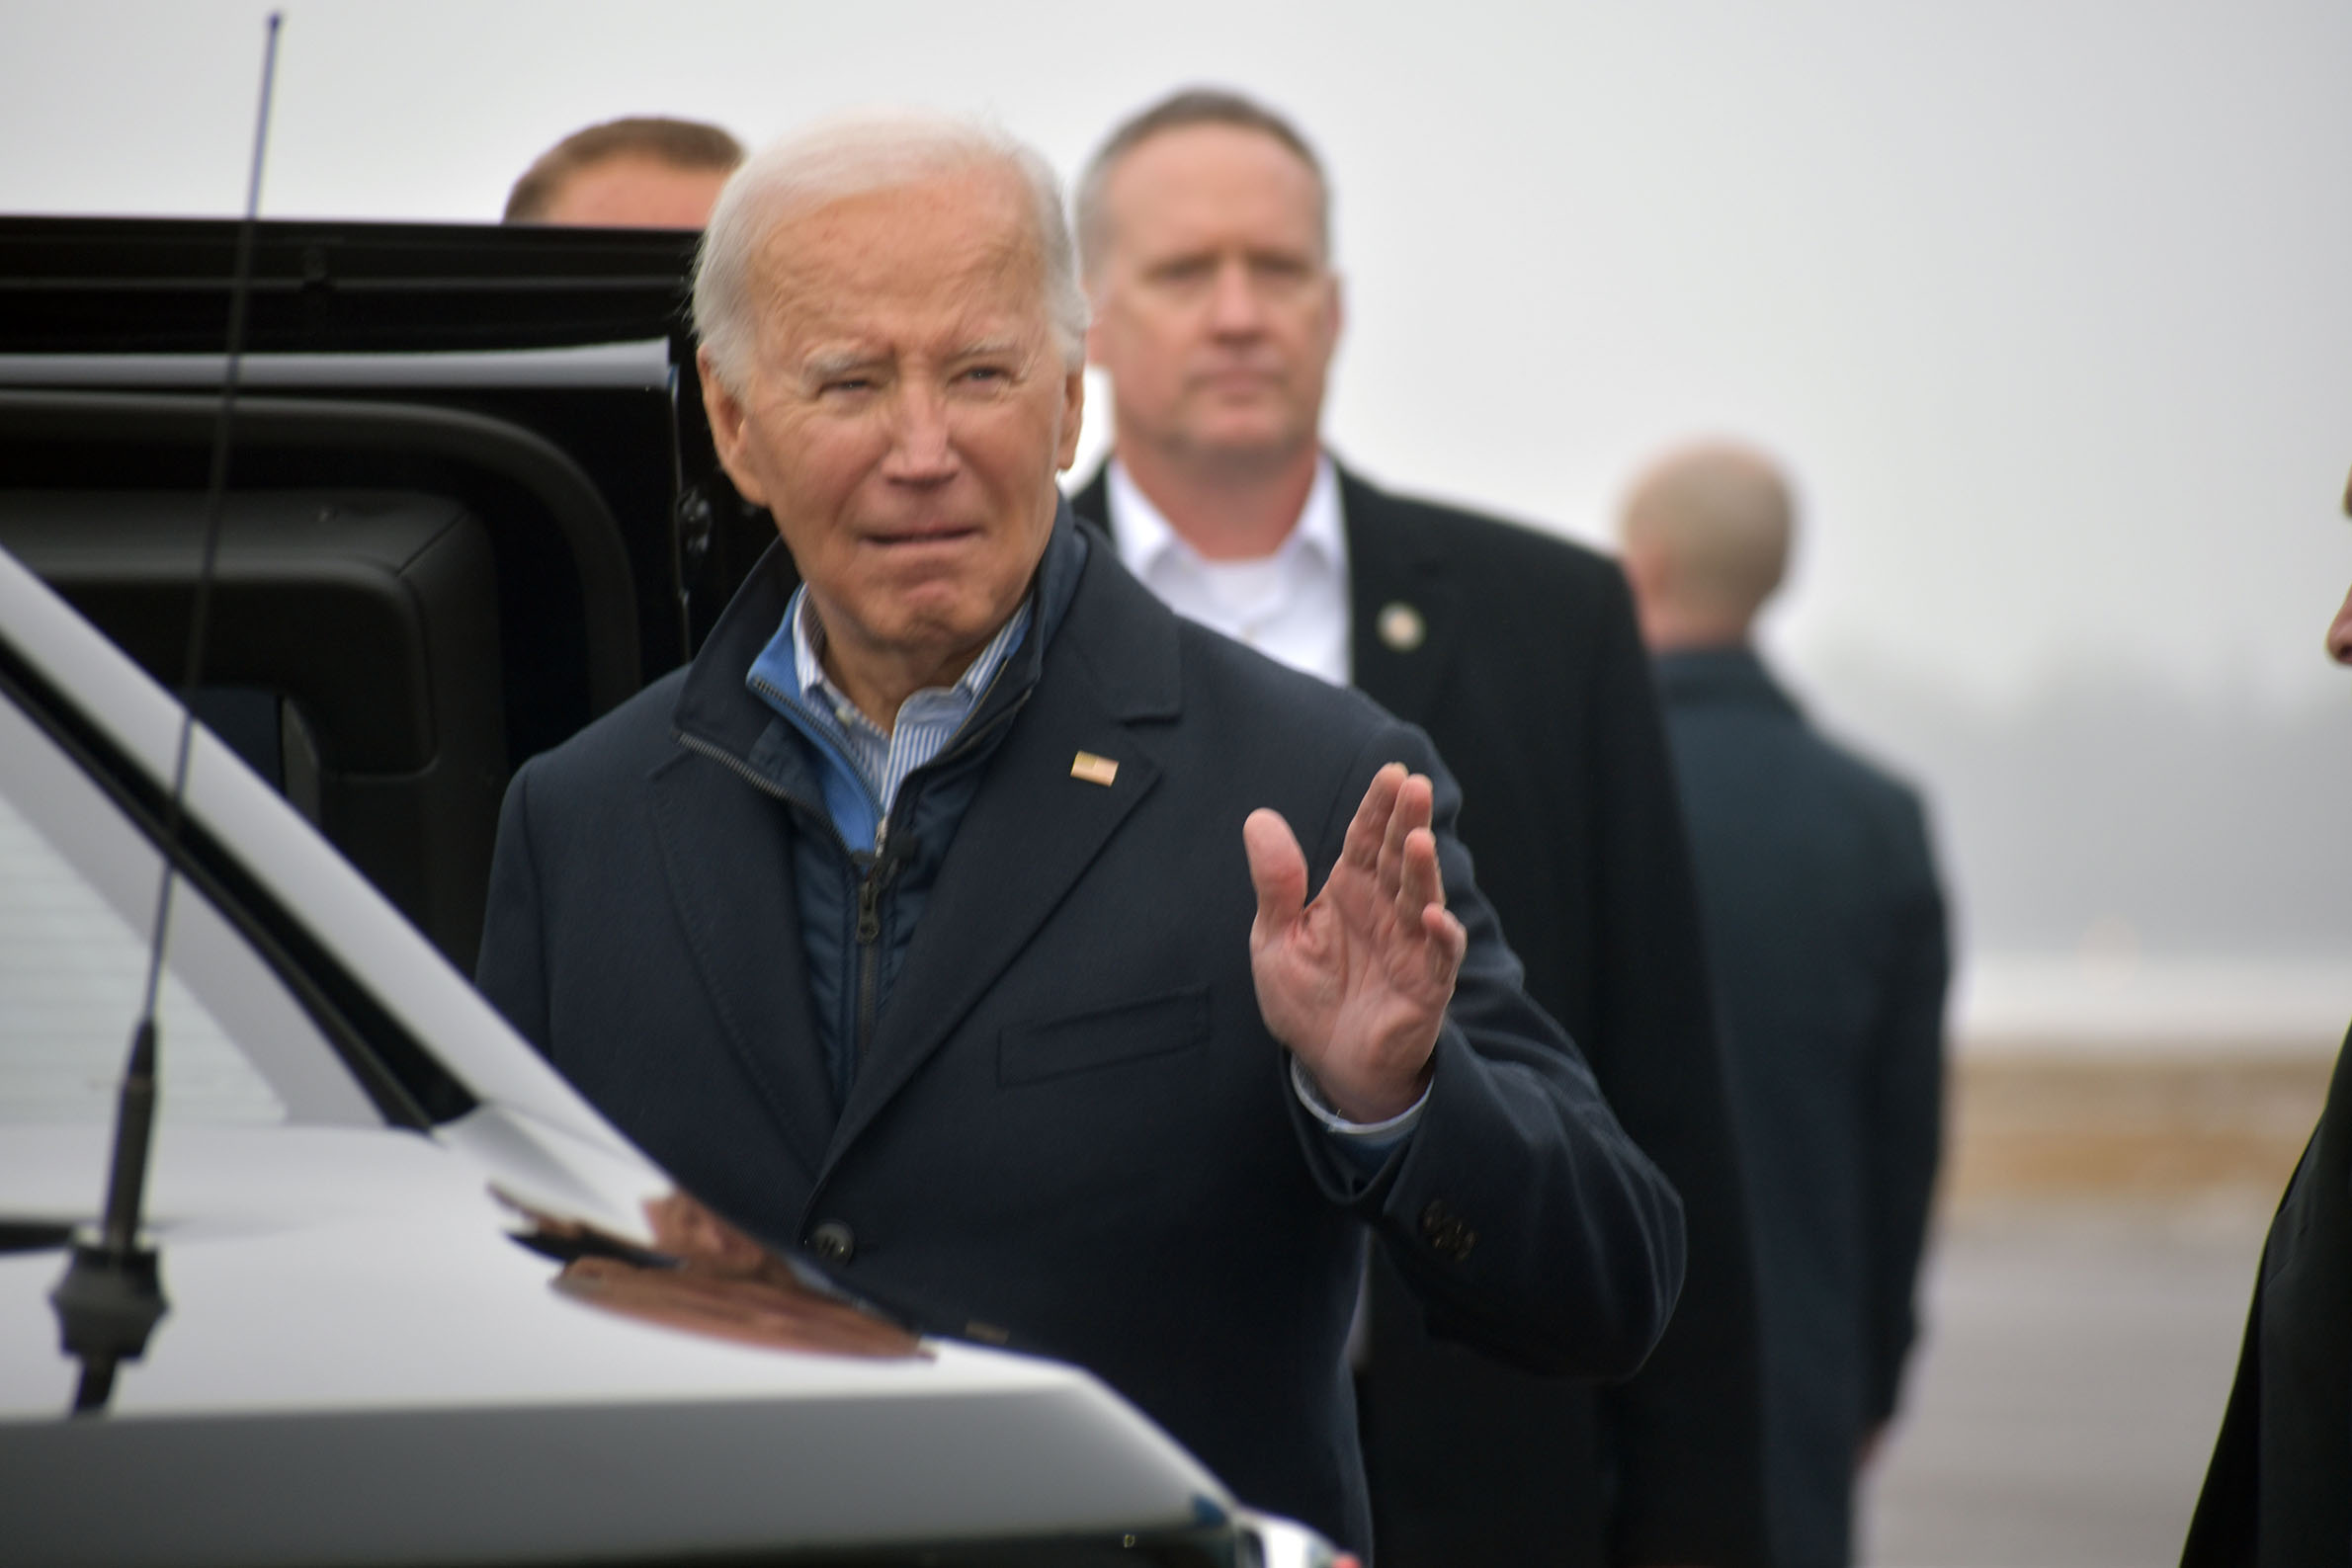 President Joe Biden waves at the press pool as he leaves in the presidential motorcade bound for Superior.